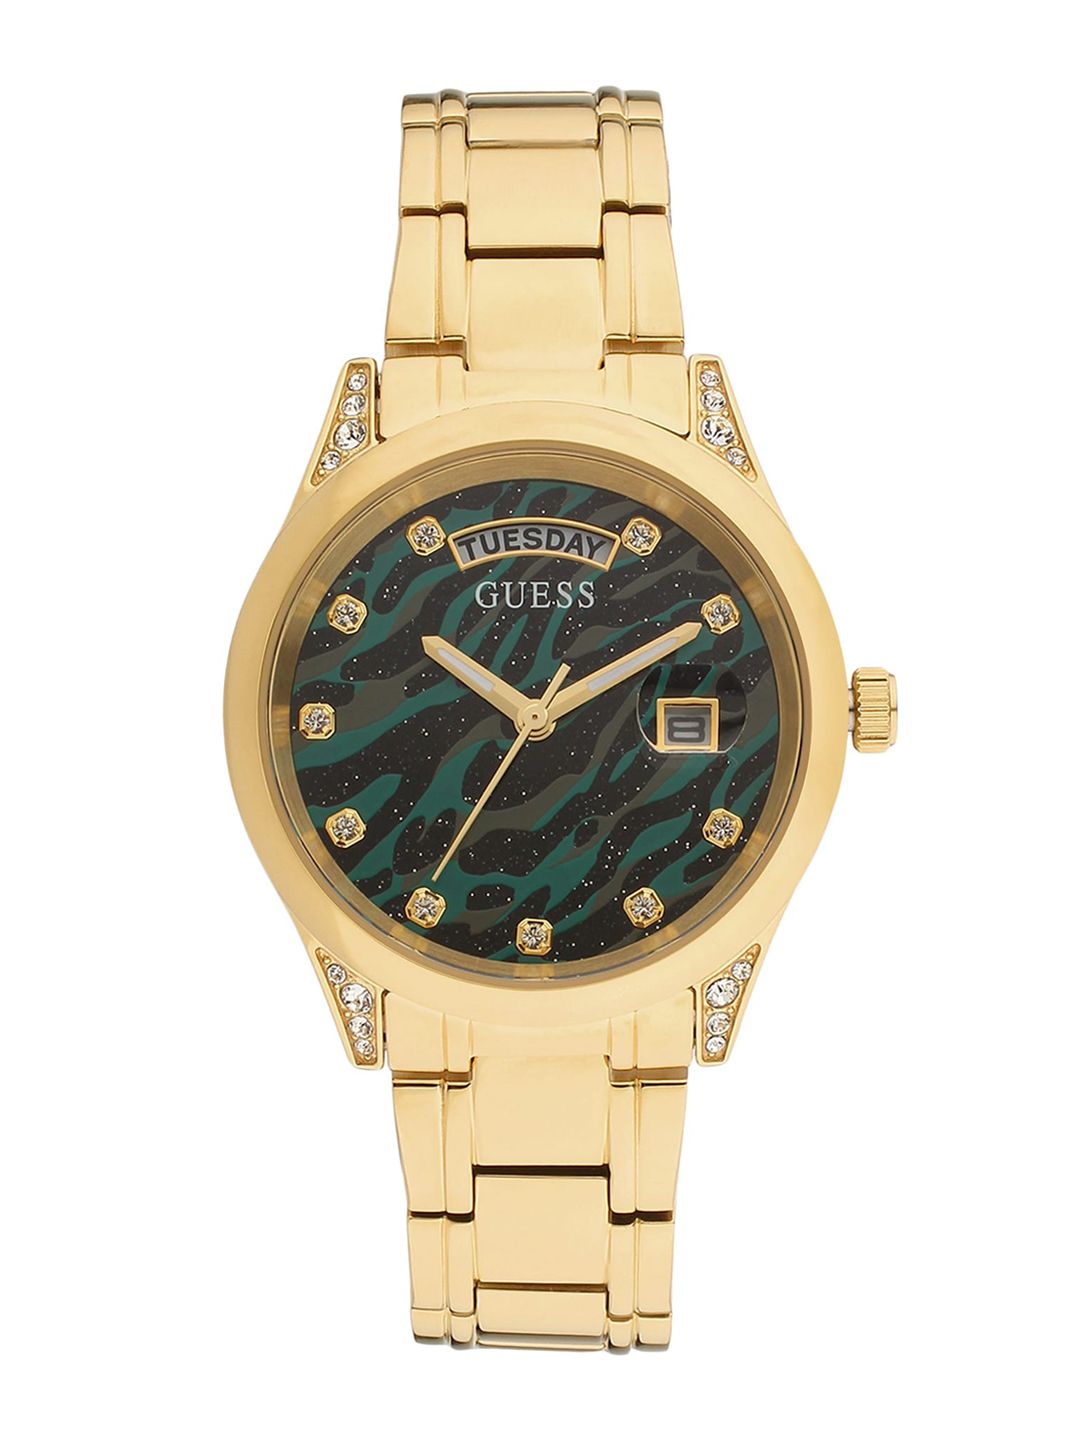 GUESS Women Gold-Toned Printed Dial & Gold Toned Bracelet Style Strap Analogue Watch Price in India